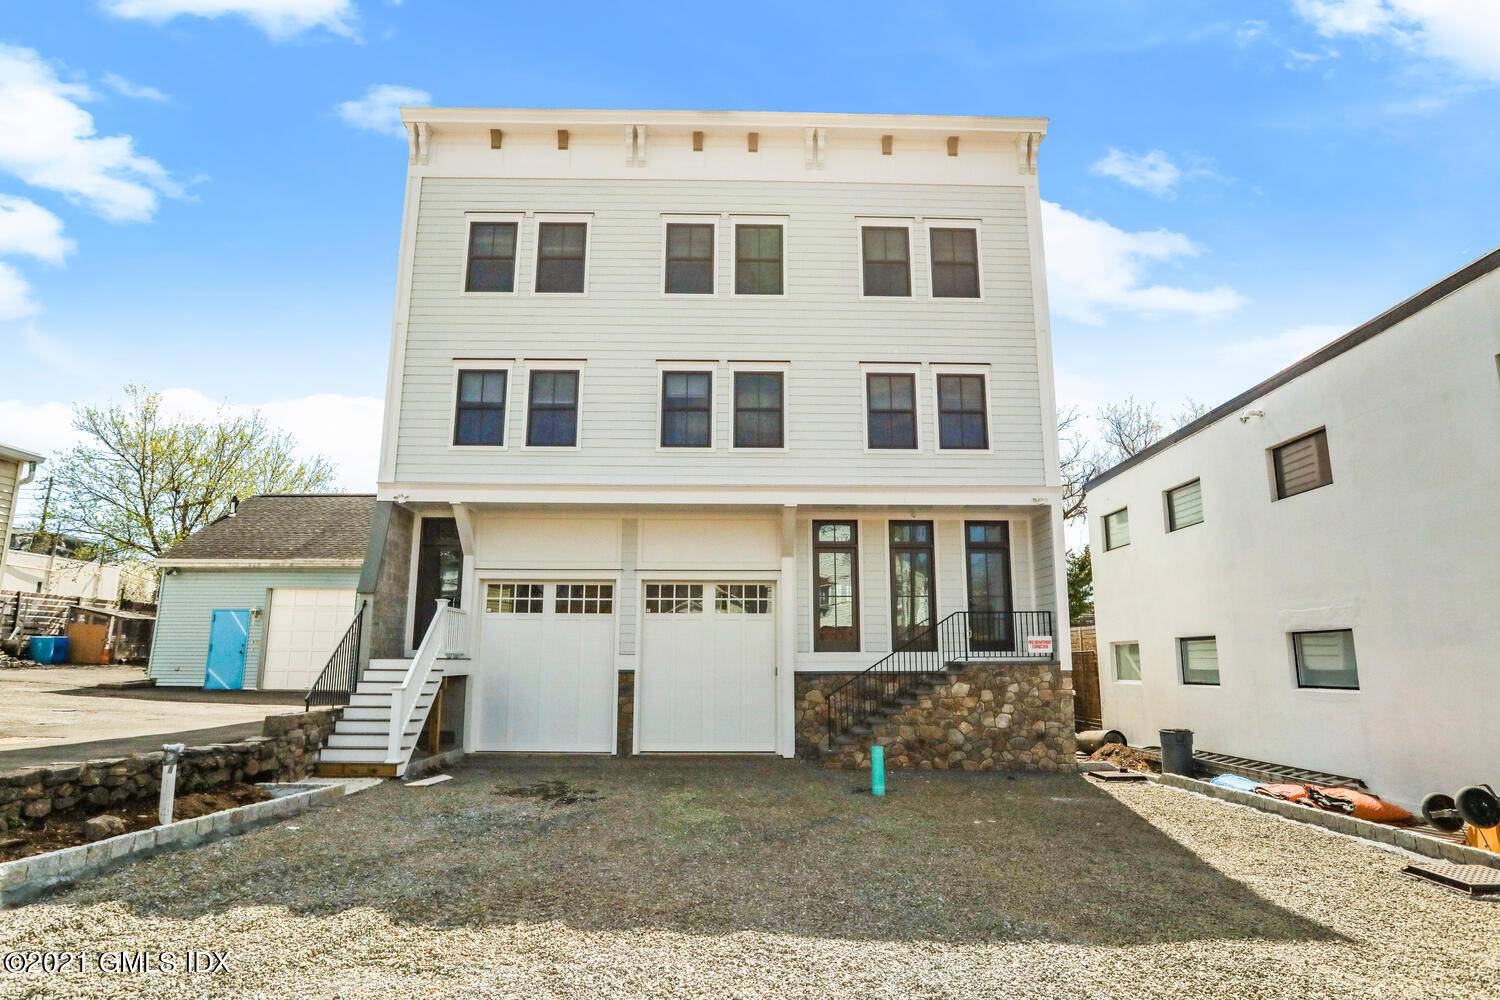 Gorgeous new construction on a cul de sac in downtown Byram with views of the Byram River.